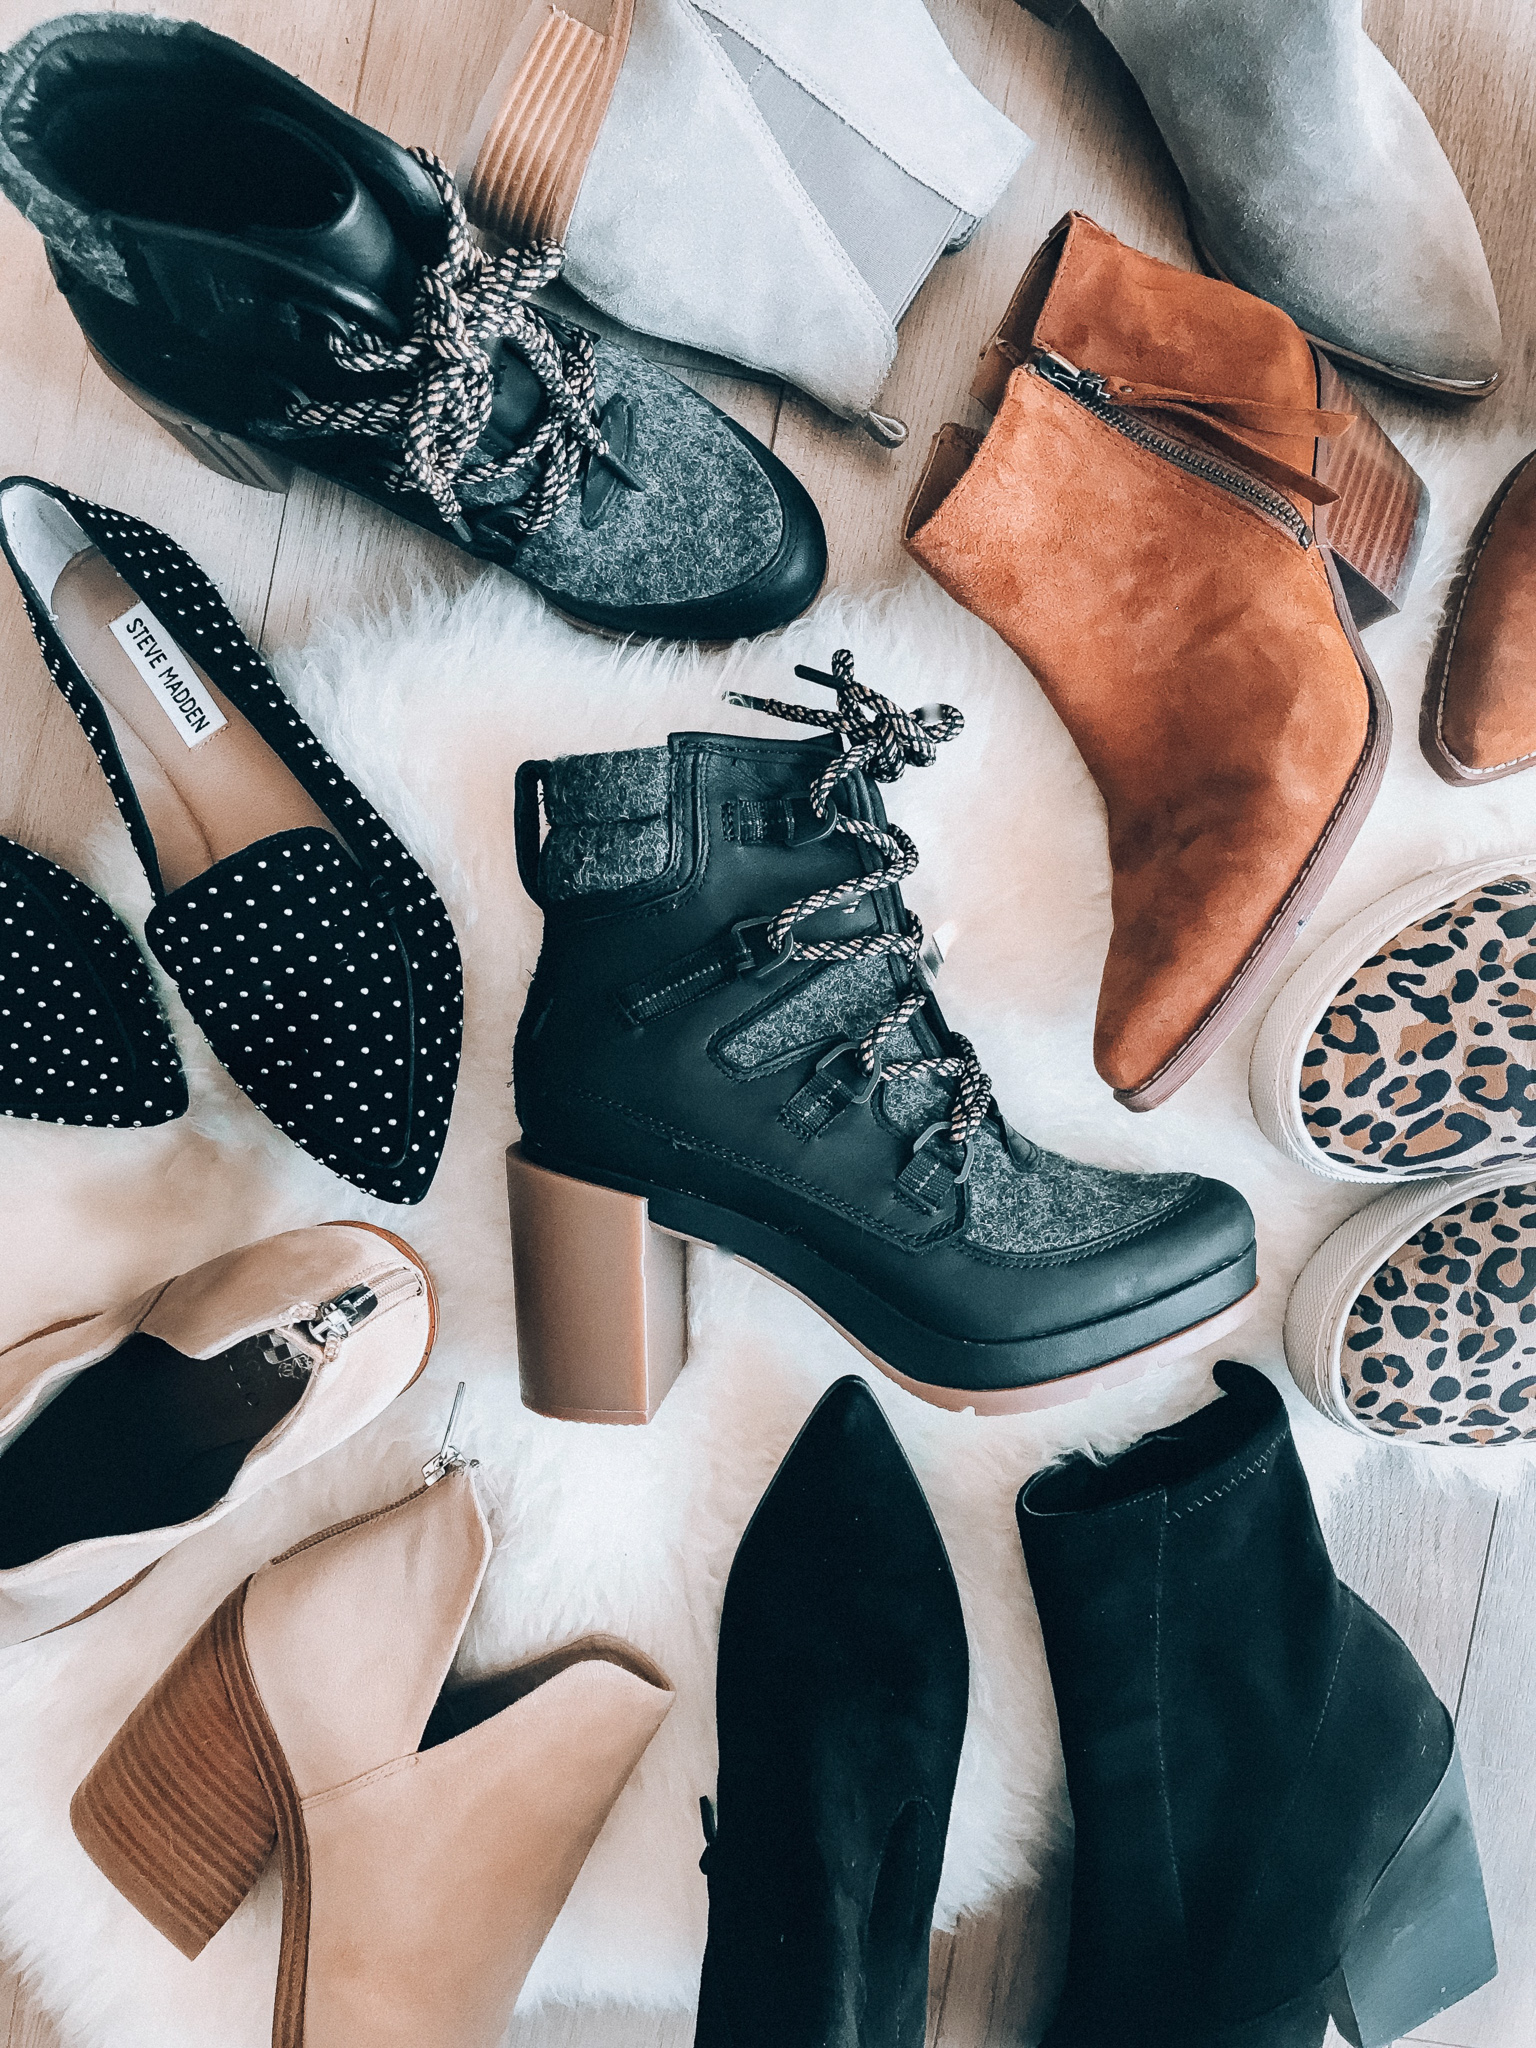 most popular booties fall 218